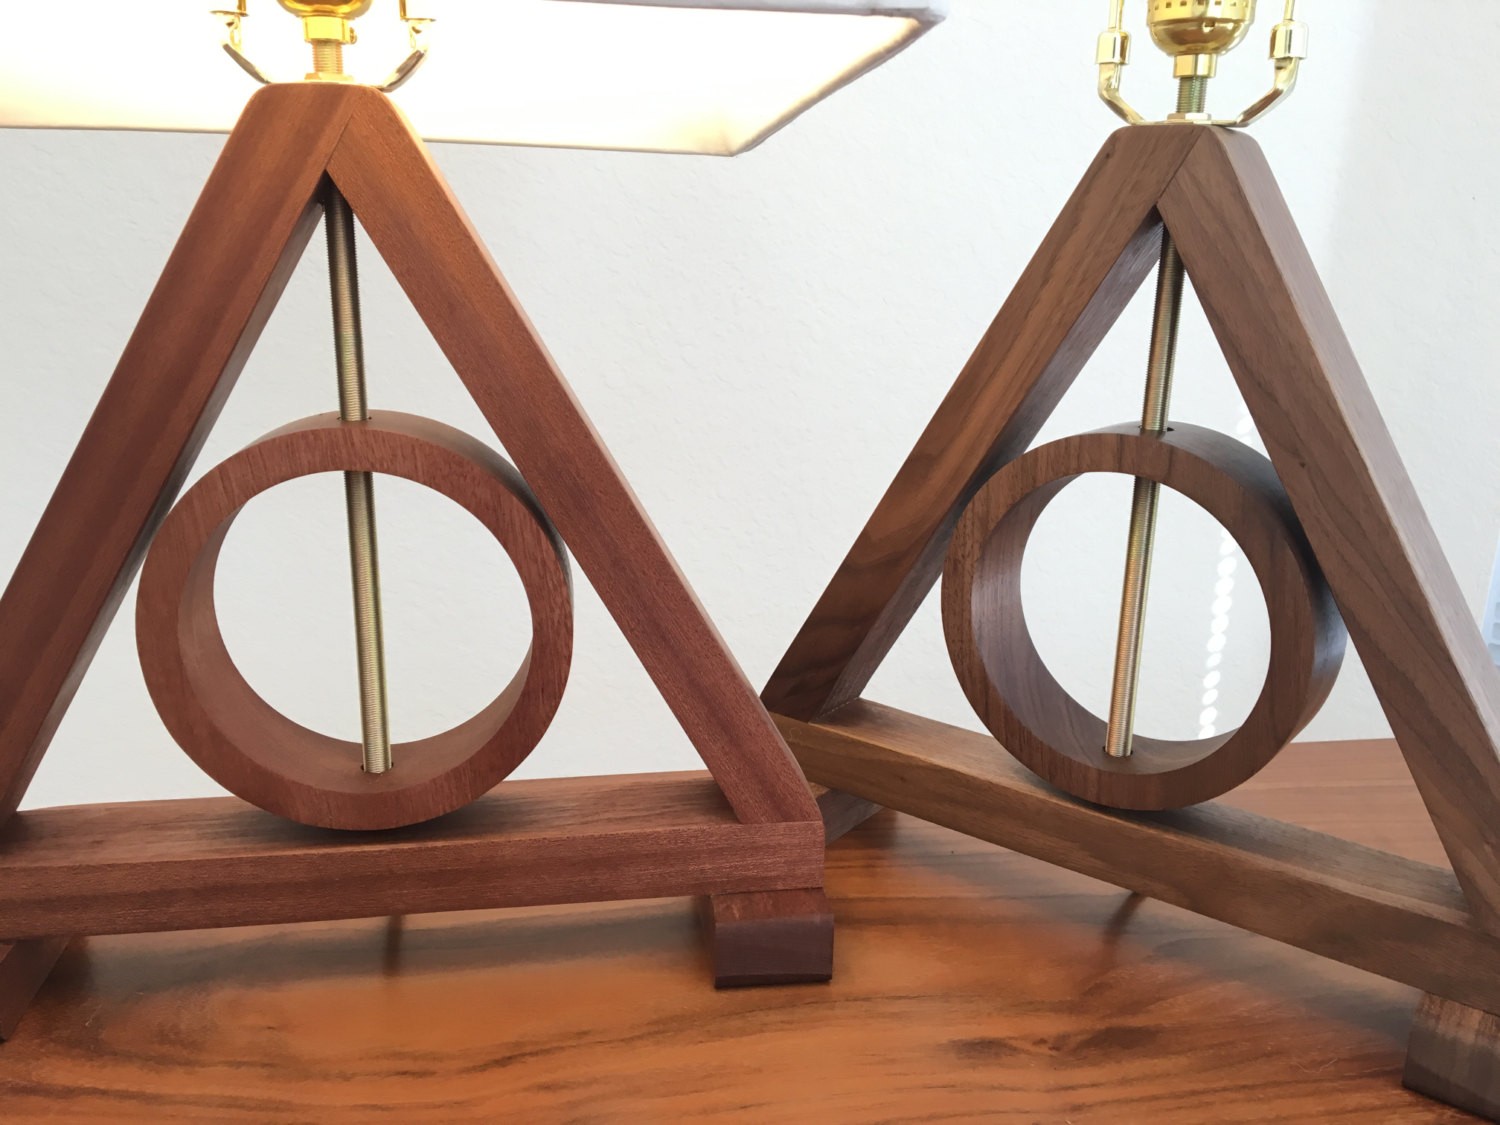 Harry potter deathly hallows table lamp harry potter kids lamp